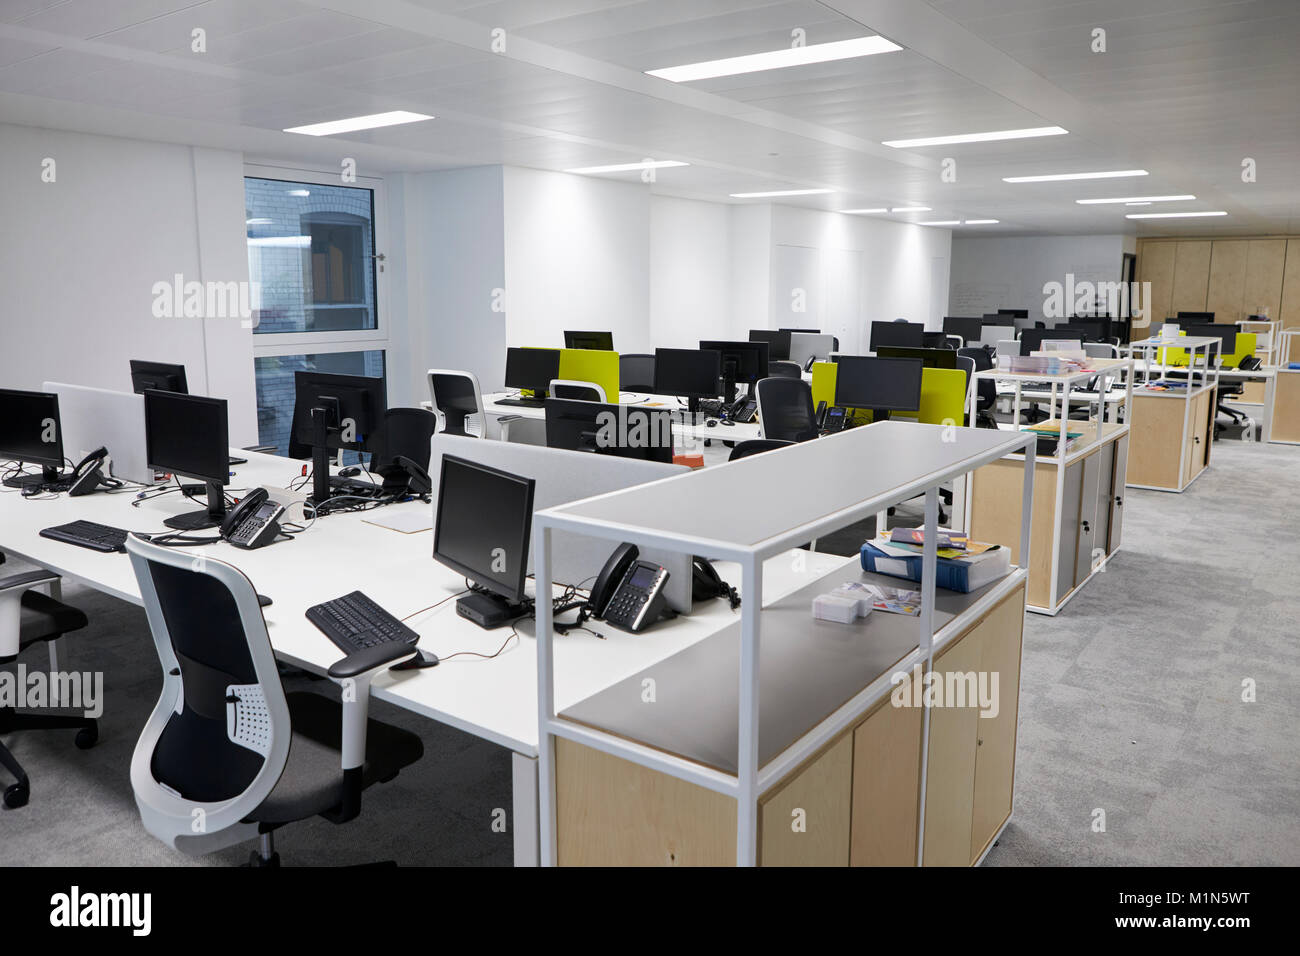 Empty open plan office with multiple work stations Stock Photo